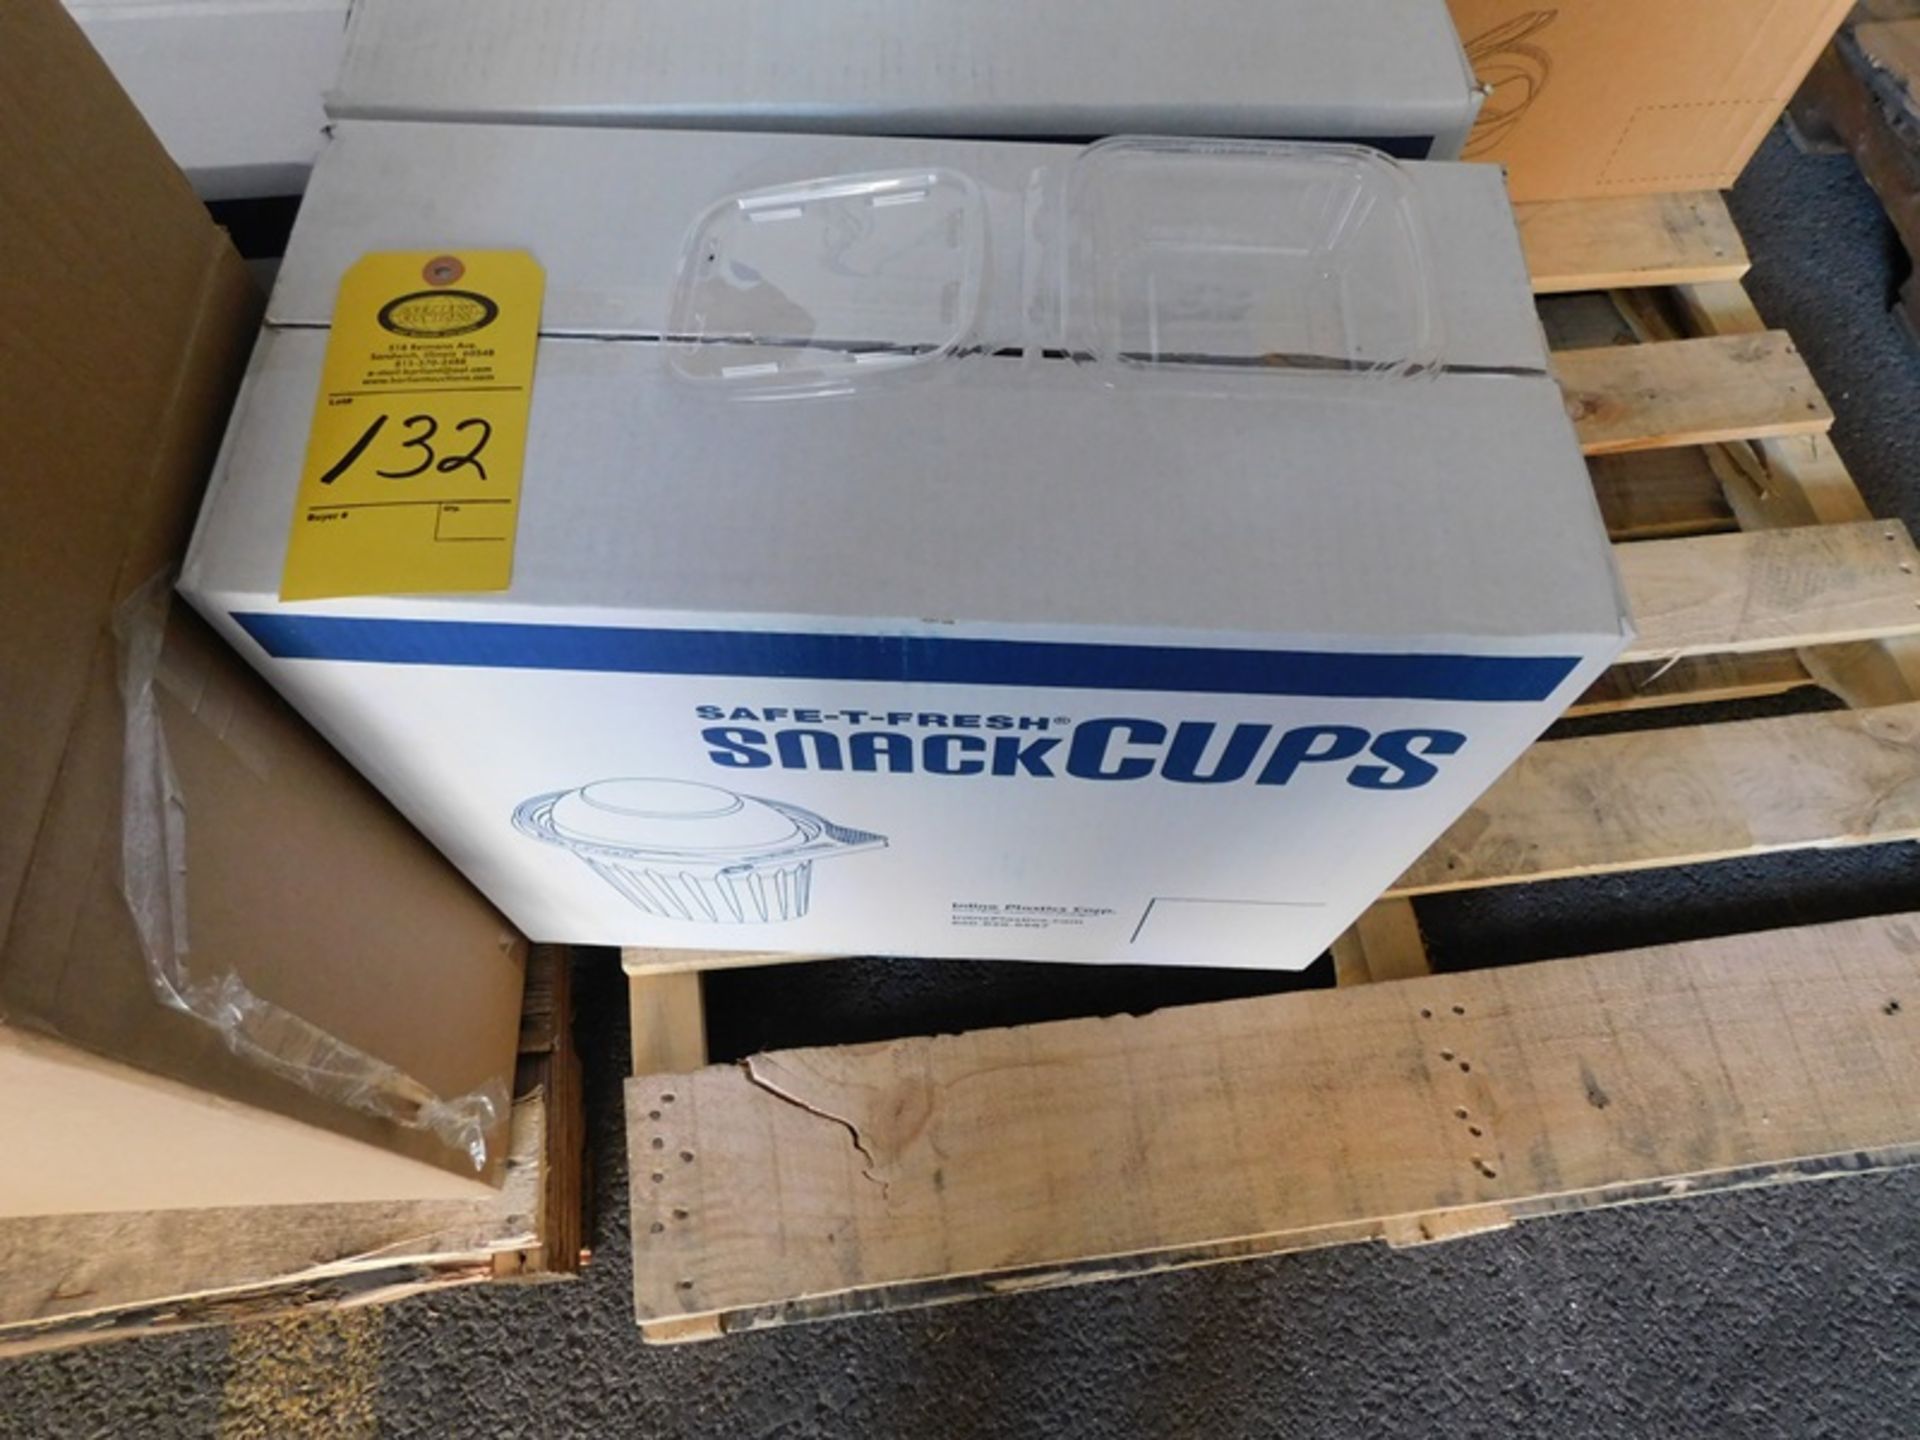 Packaging Materials- Boxes, Clean Trays and Lids, Rolls of Bubble Wrap & Snack Cups - (Loading Fee: - Image 3 of 12